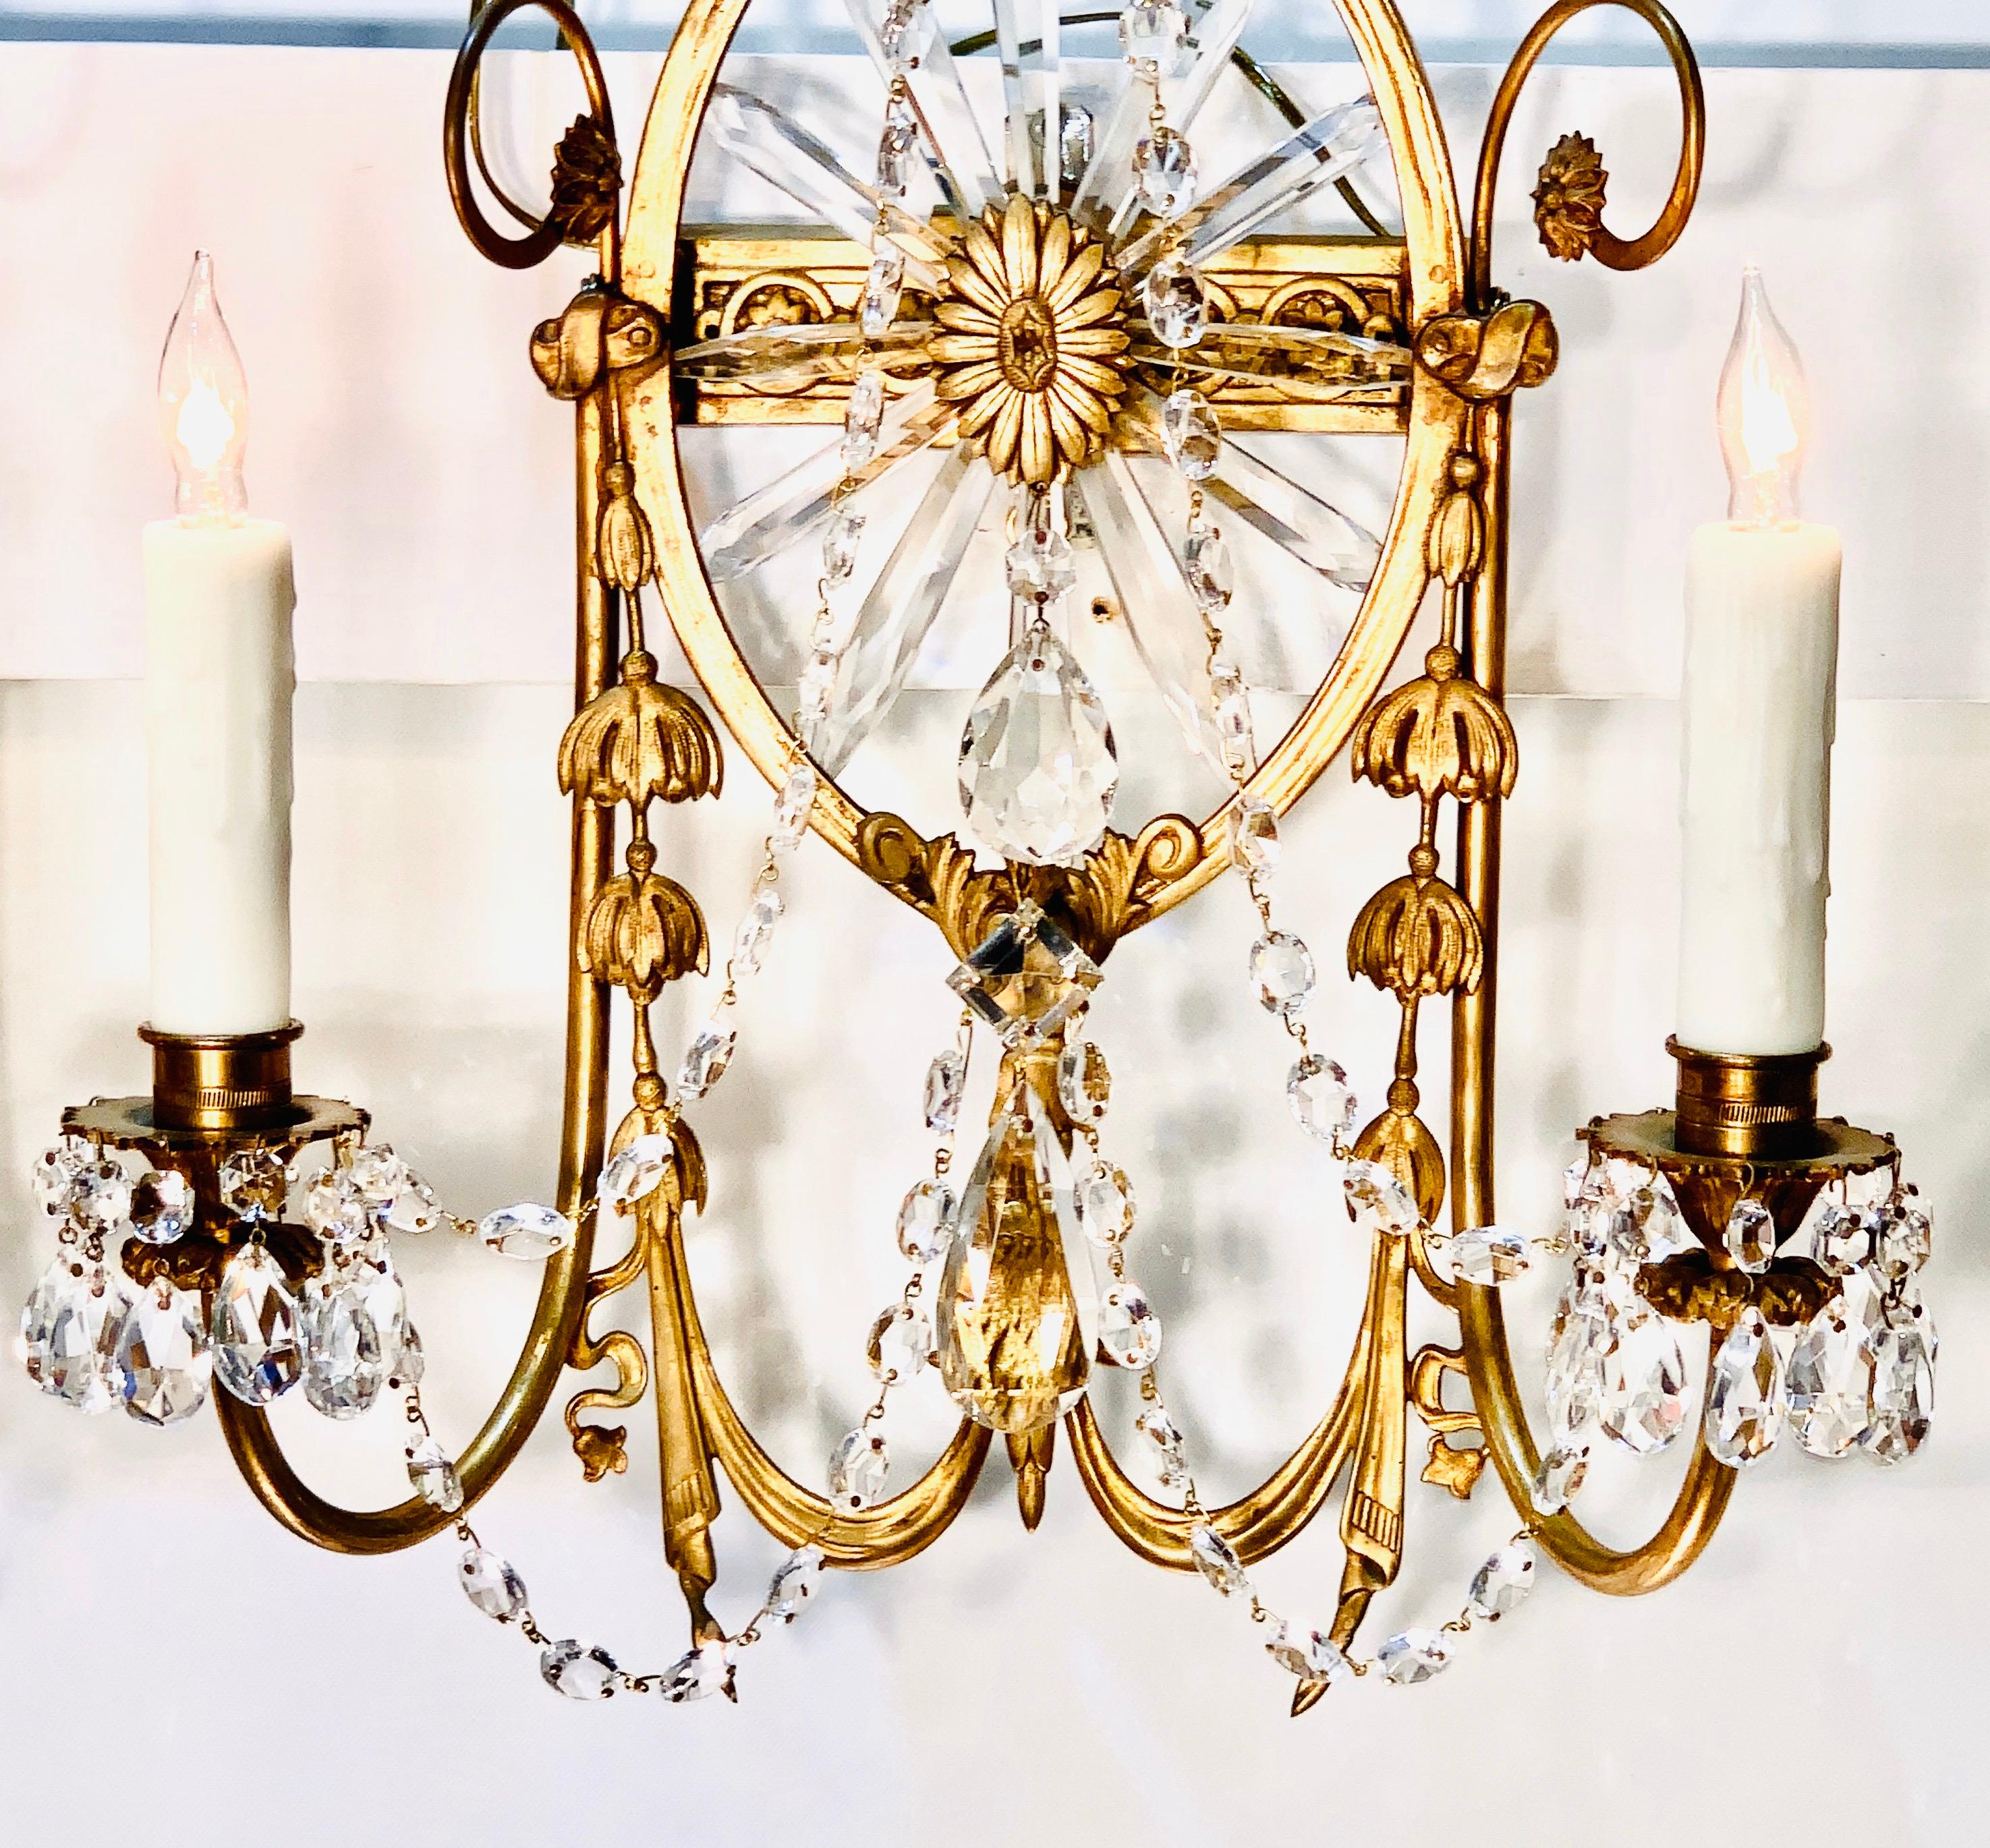 Classical Regency Style Pair of Caldwell Sconces, circa 1920s For Sale 3